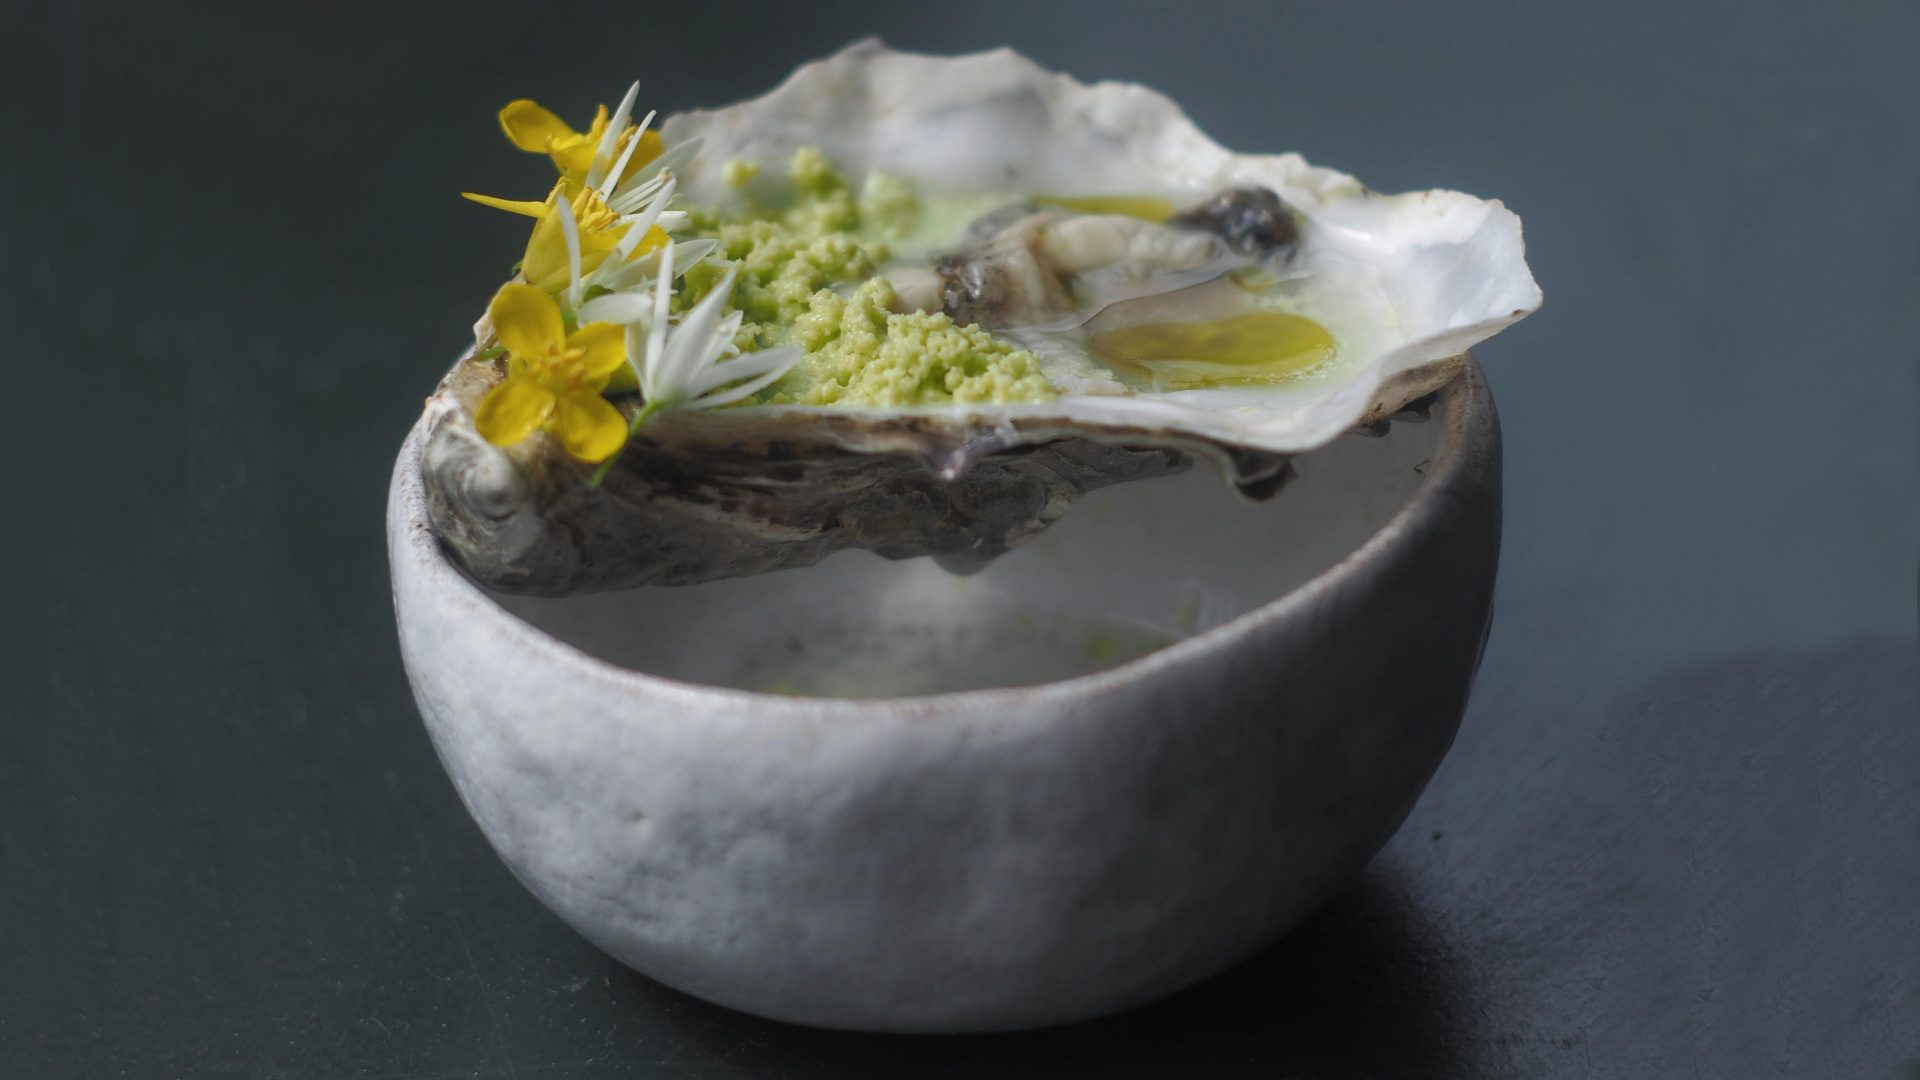 Harriet Mansell's oysters